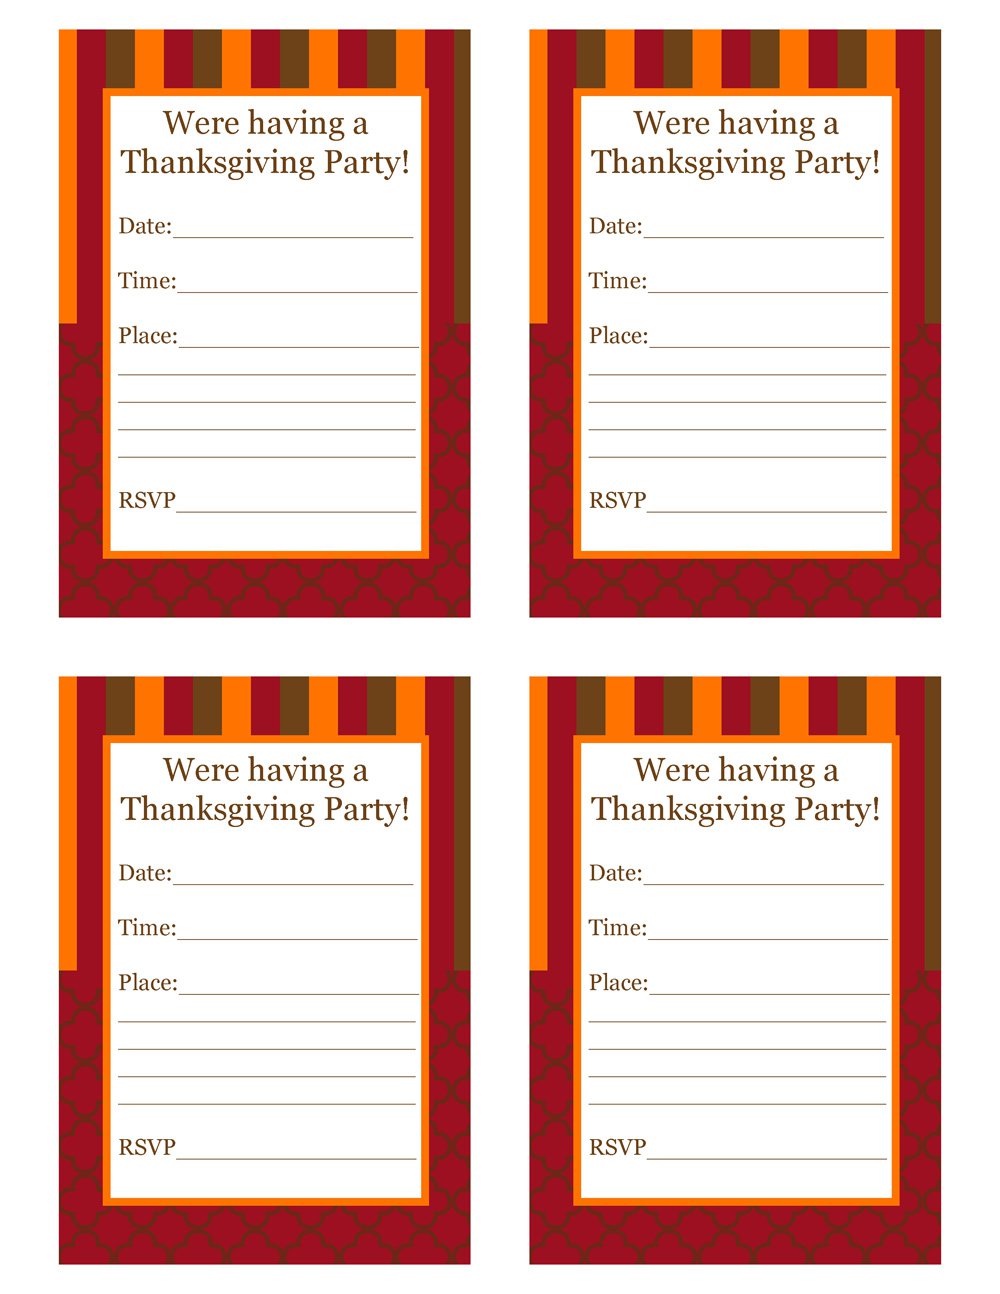 Free Printable Thanksgiving Party Invitations